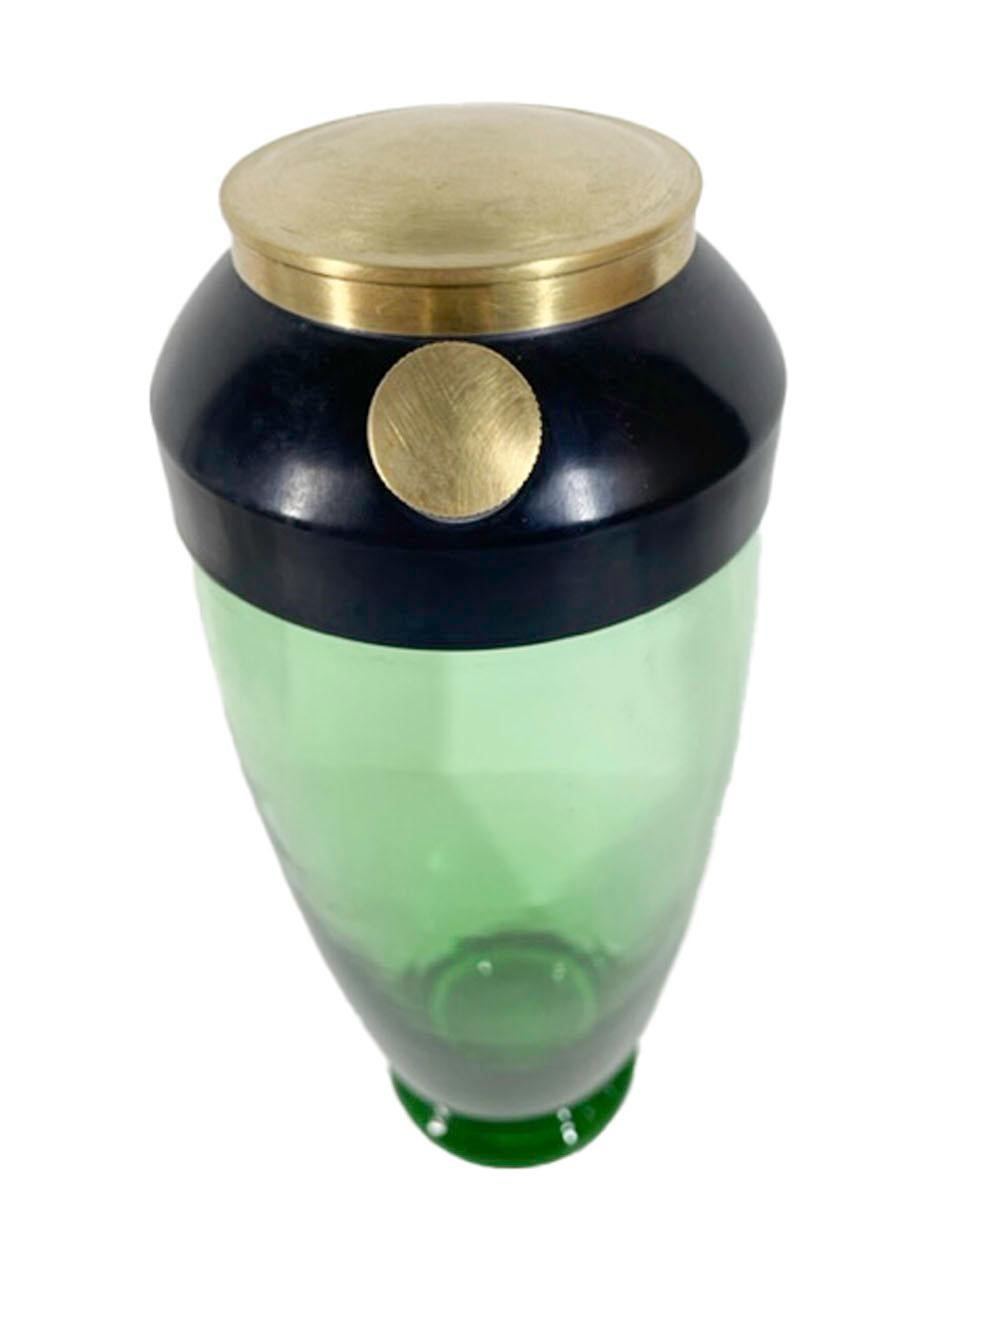 Art Deco, emerald green glass footed cocktail shaker with a black enameled steel lid having a brass cover and screw-on spout cap.